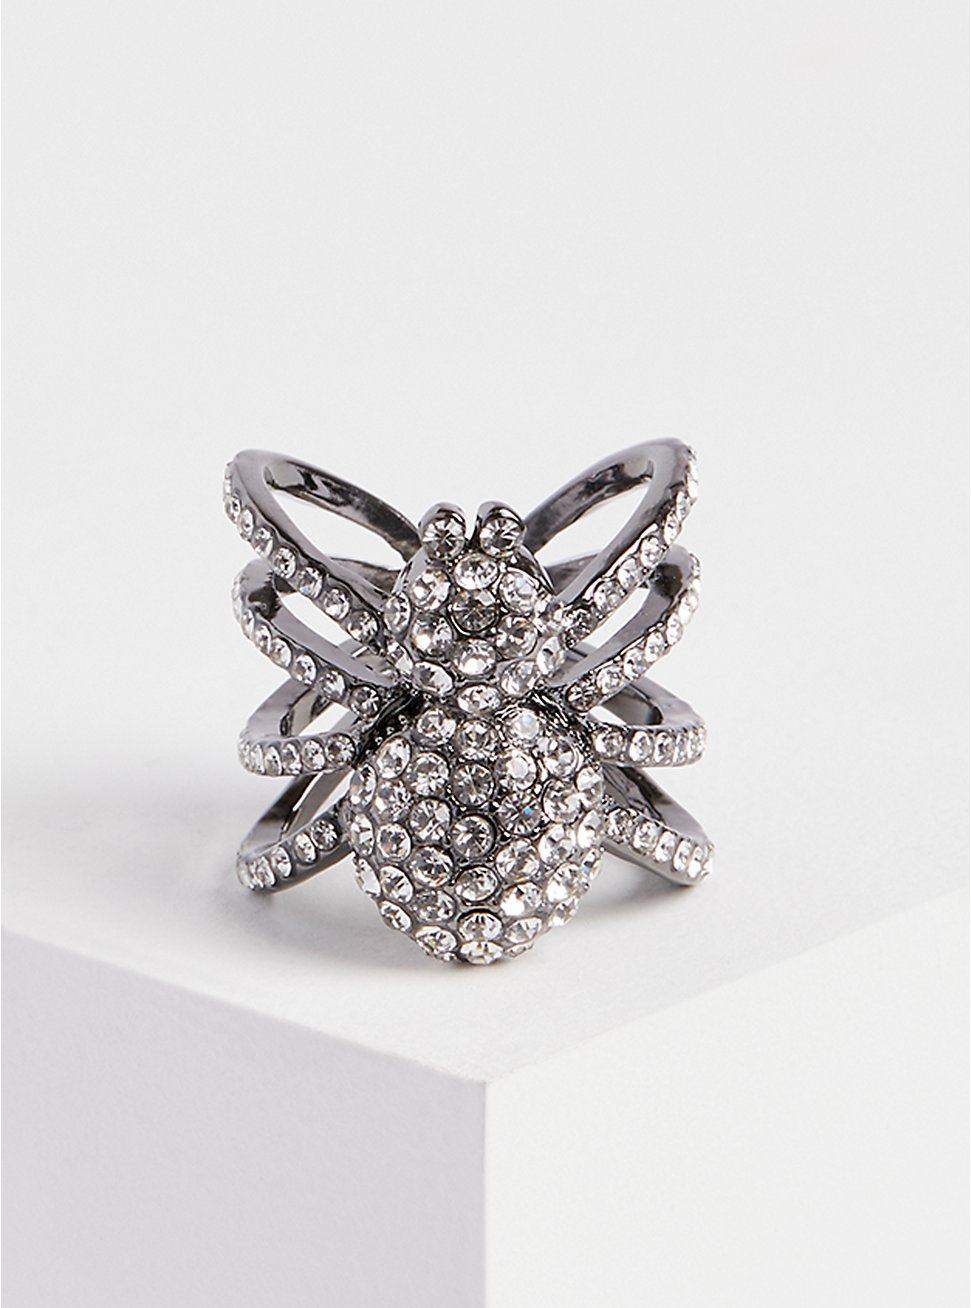 Plus Size Crystal Spider Ring - Silver Tone, MULTI, hi-res